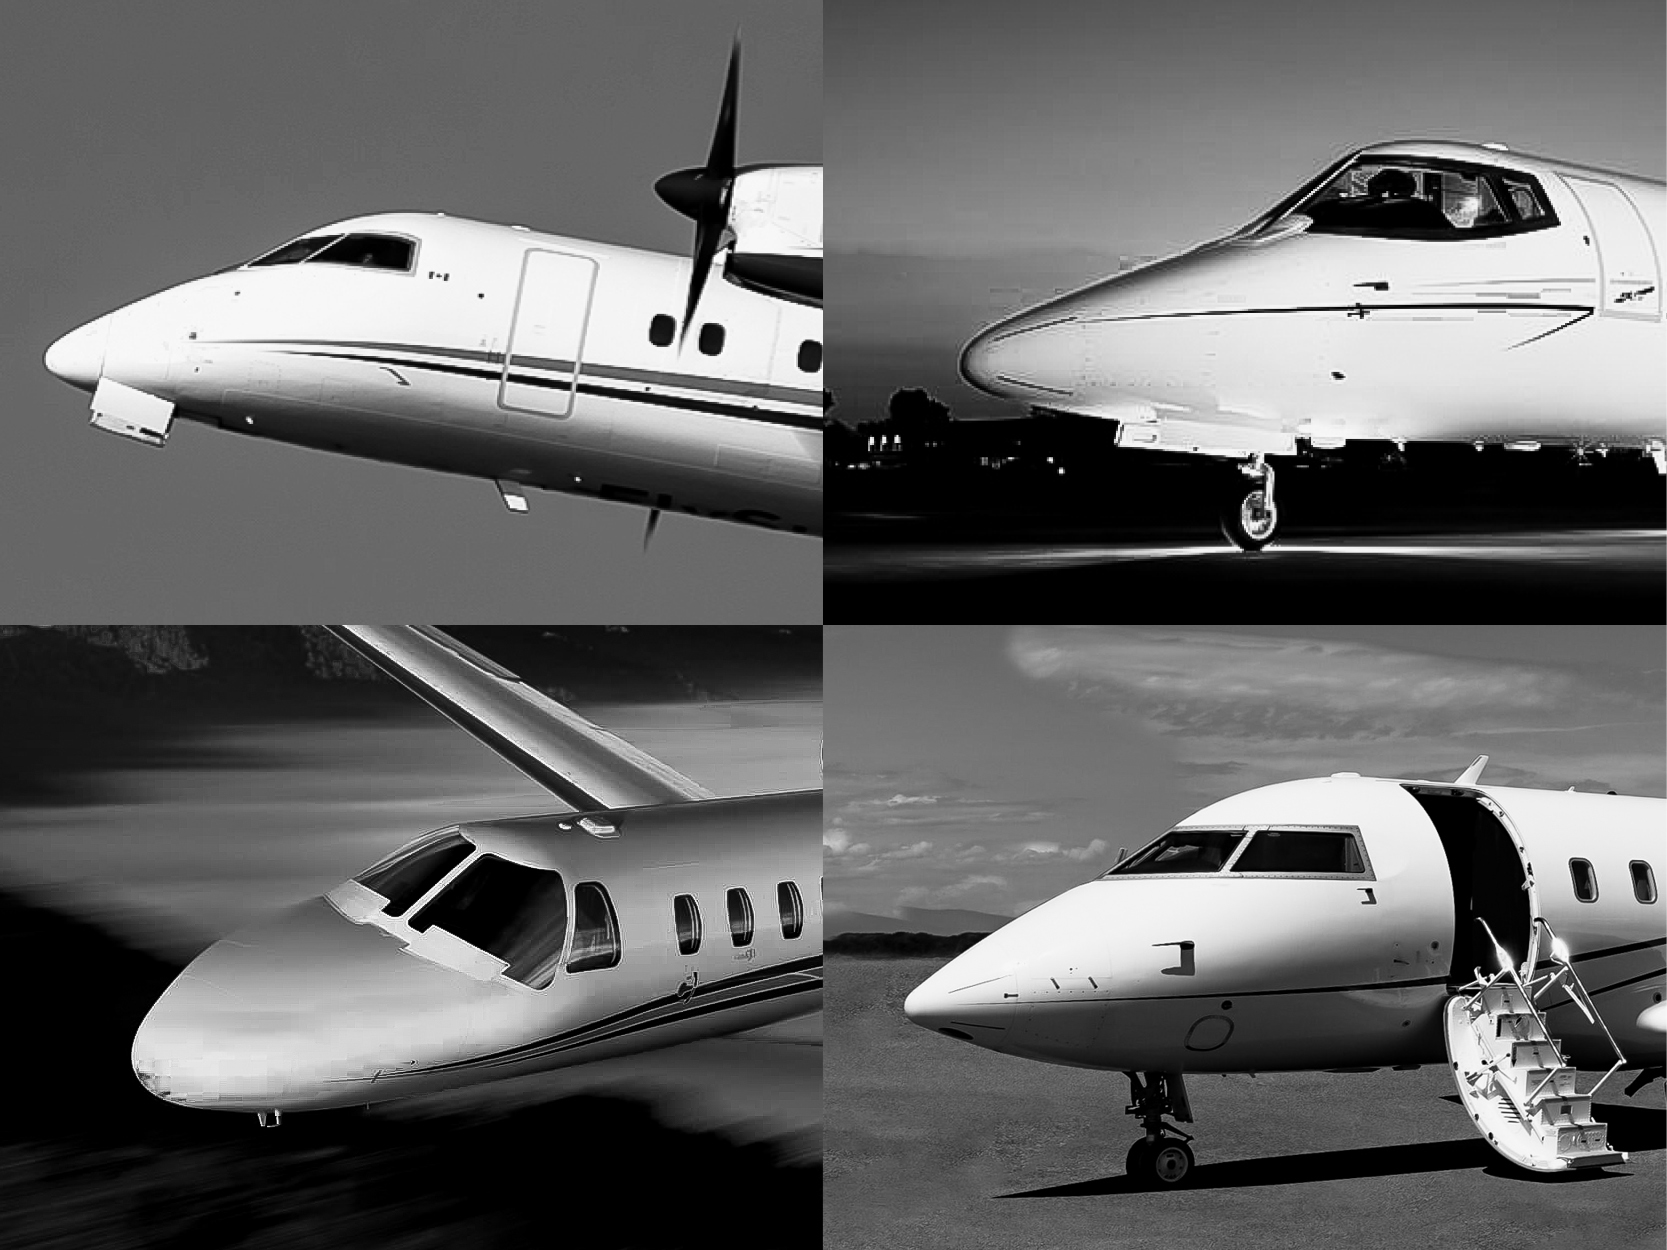 BAS Jets sells 4 jets this summer